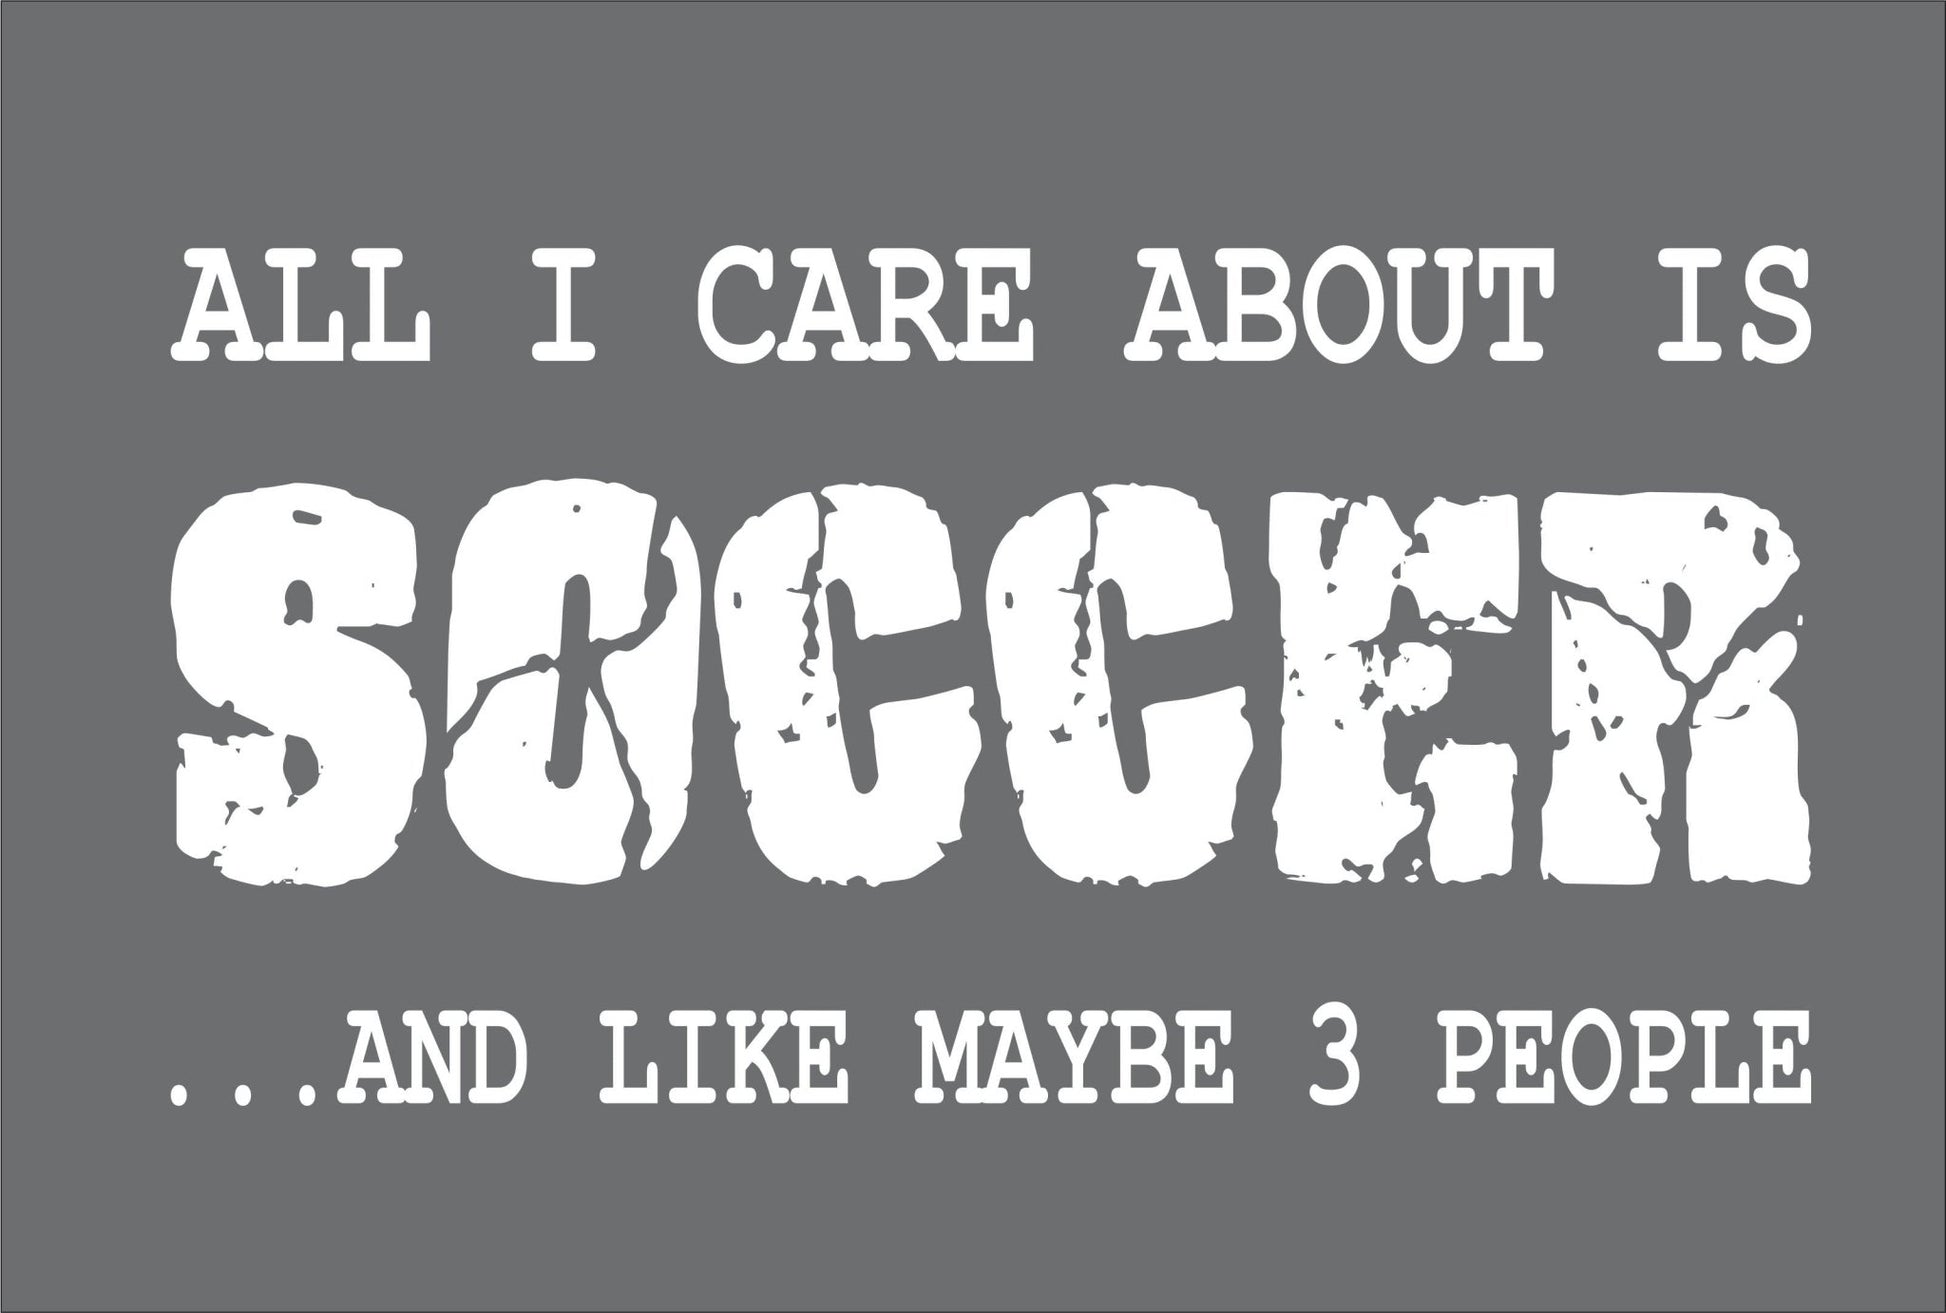 All I care about is SOCCER and like maybe 3 people T shirt - SBS T Shop